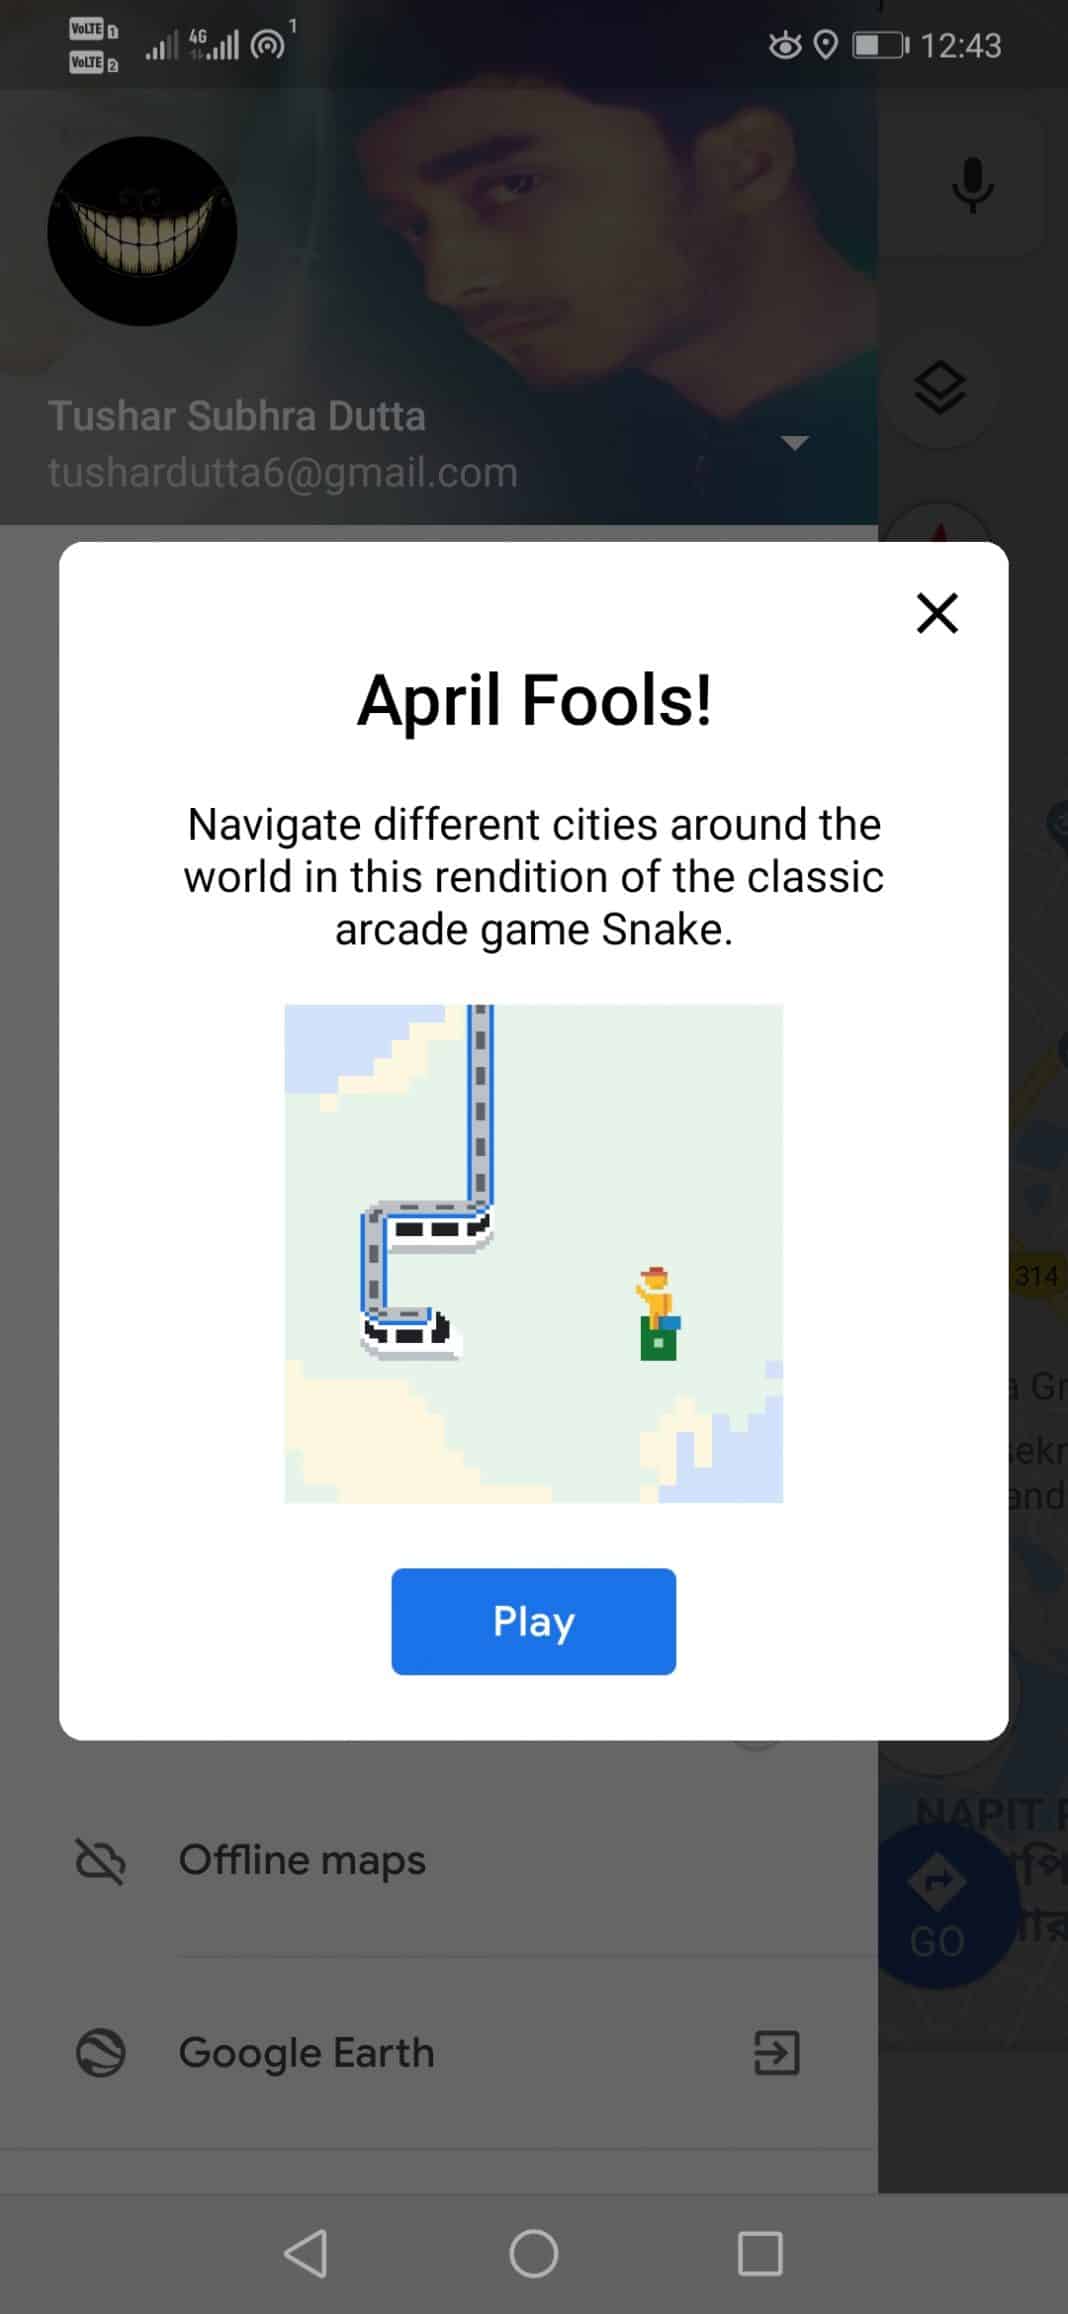 Iconic Snake Game Makes Way To Google Maps App As Google Celebrates April  Fool's Day 2019